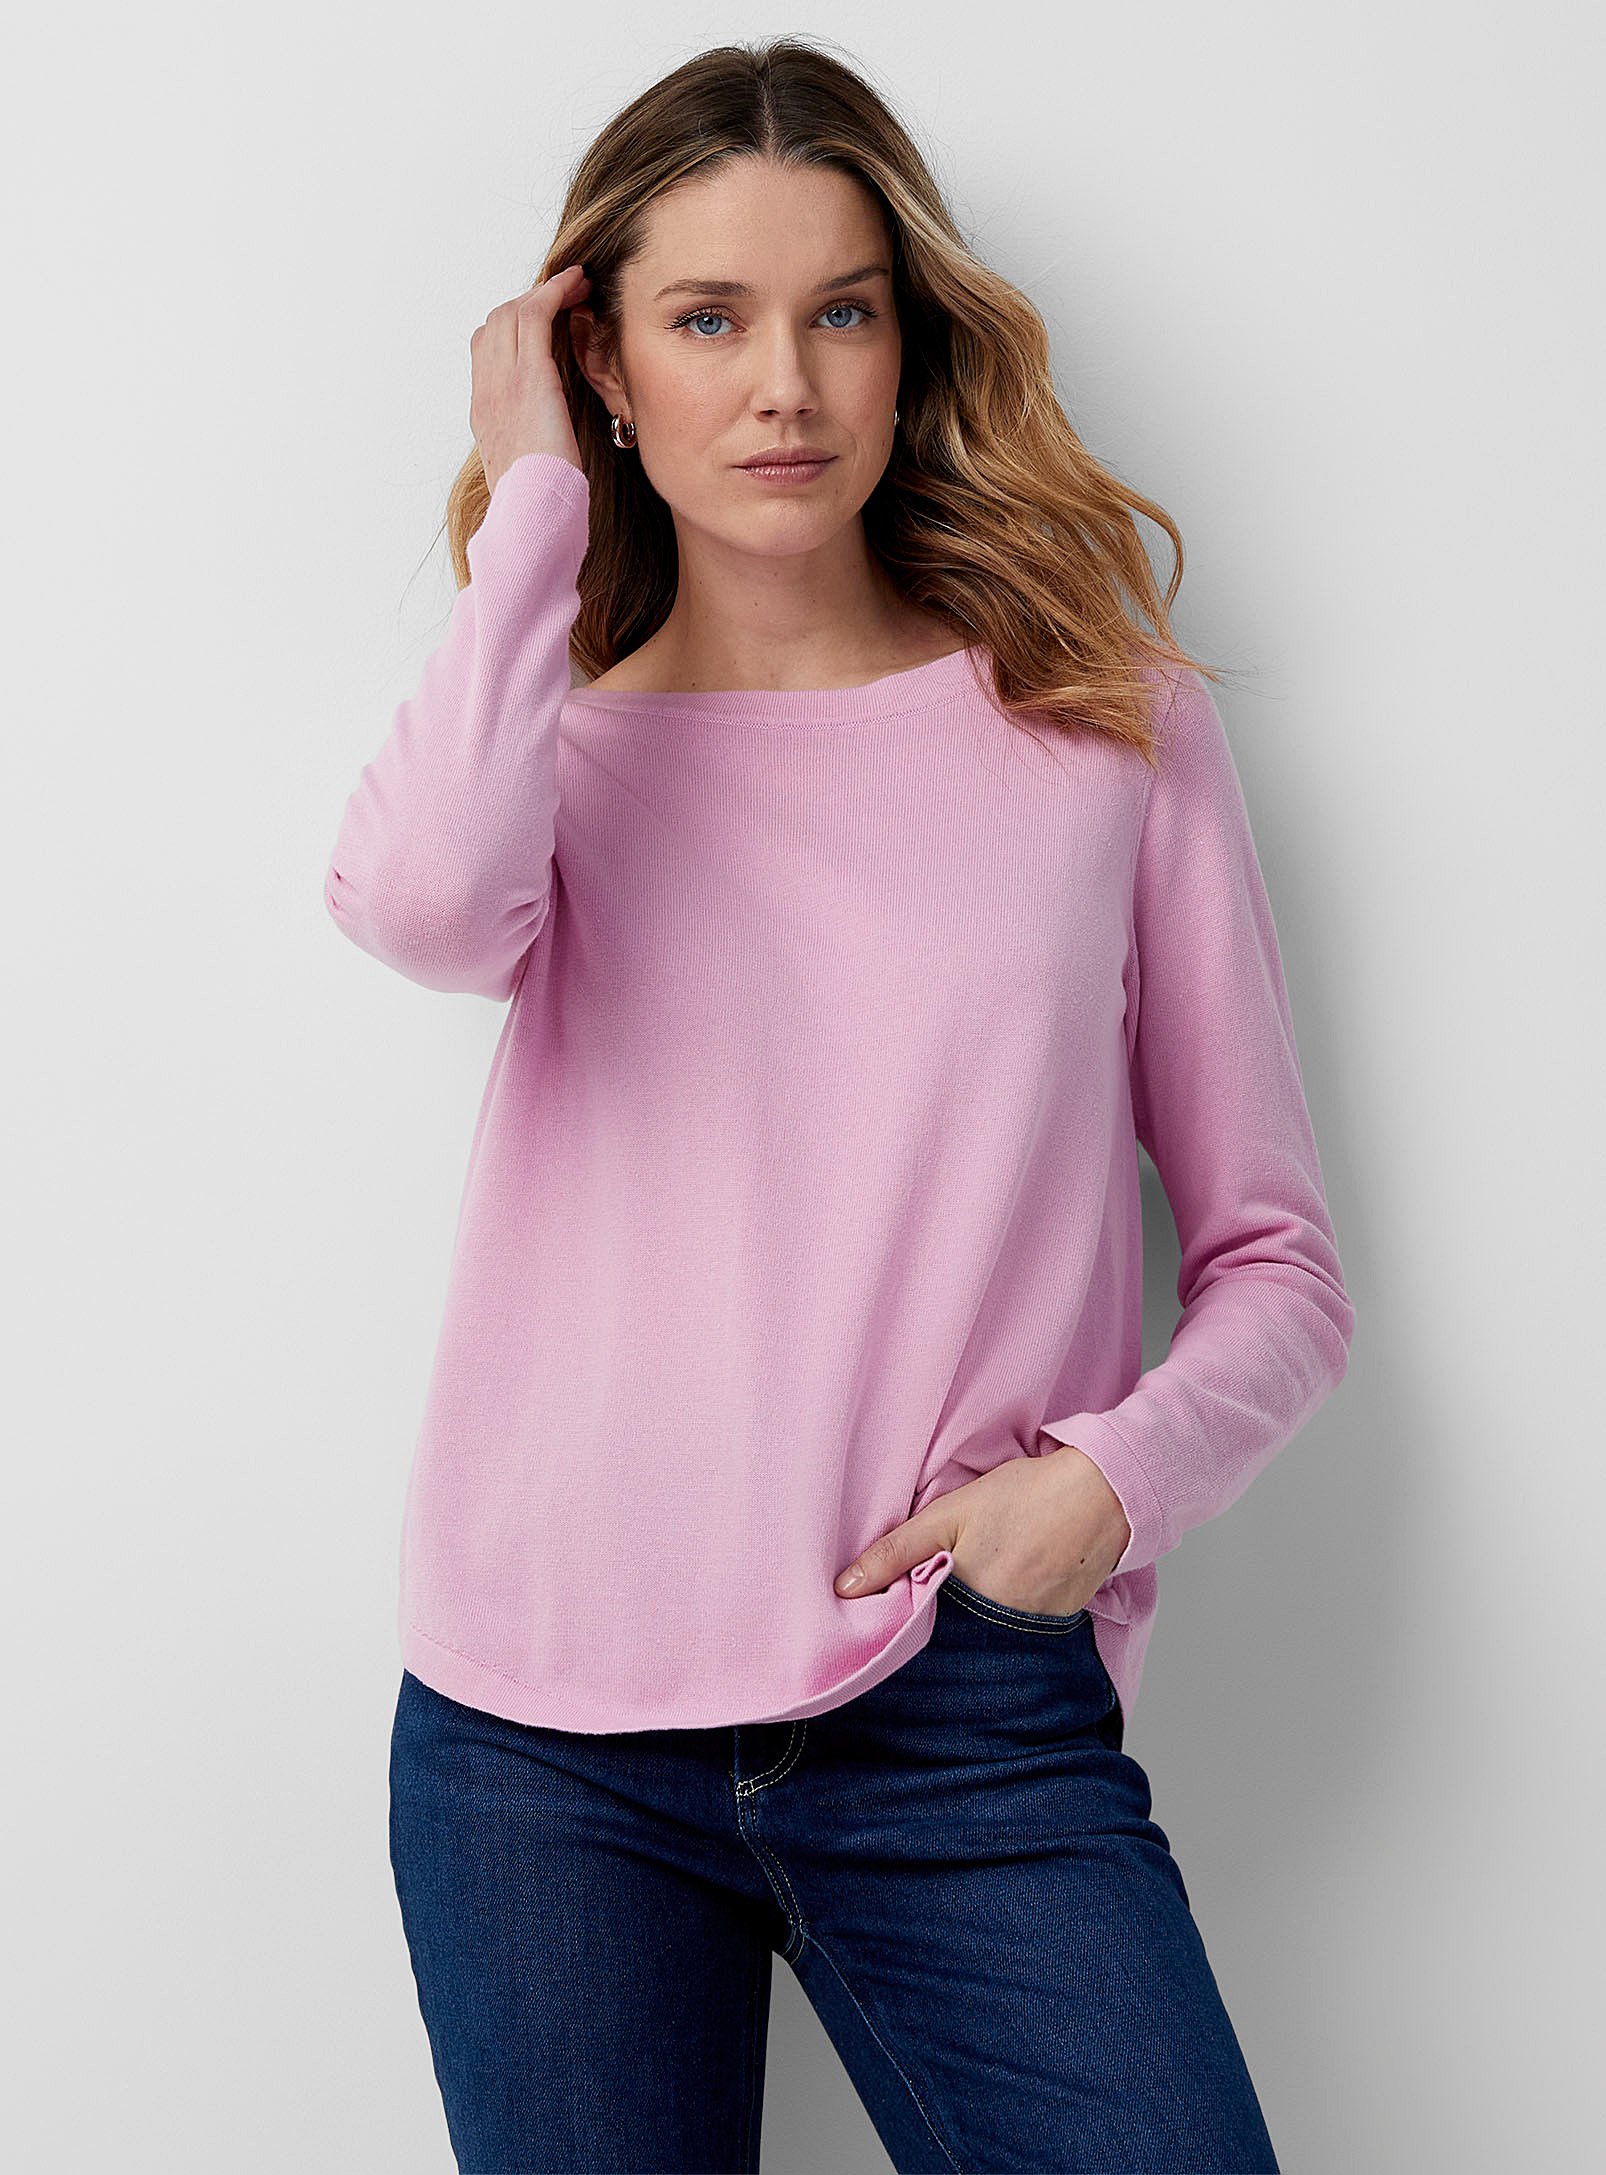 Contemporaine Rounded Boat-neck Sweater In Peach